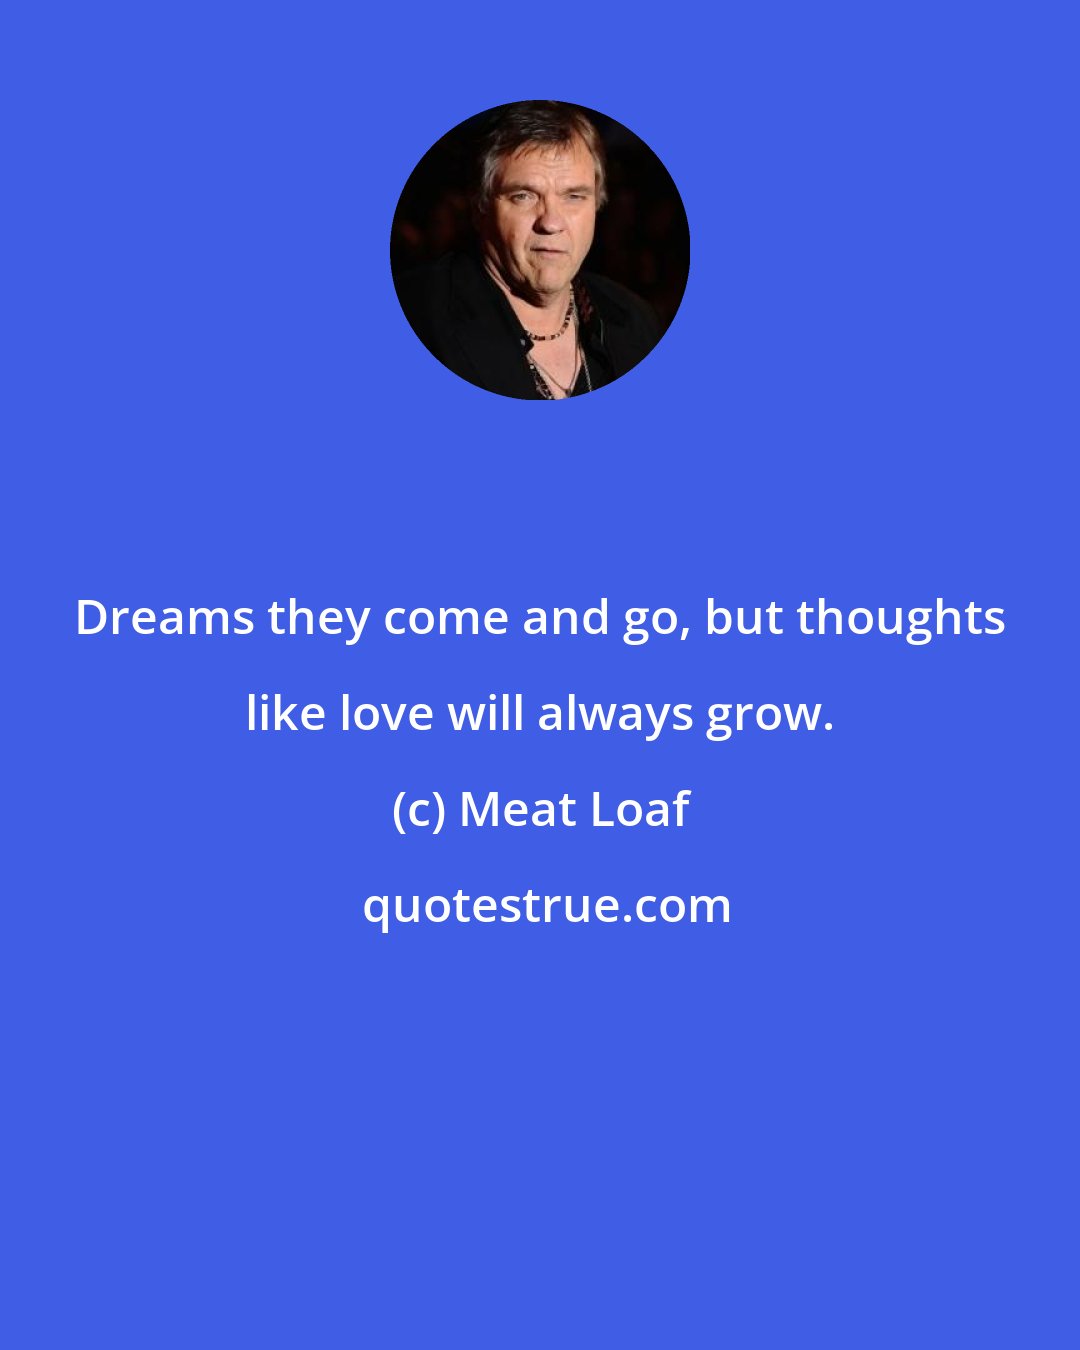 Meat Loaf: Dreams they come and go, but thoughts like love will always grow.